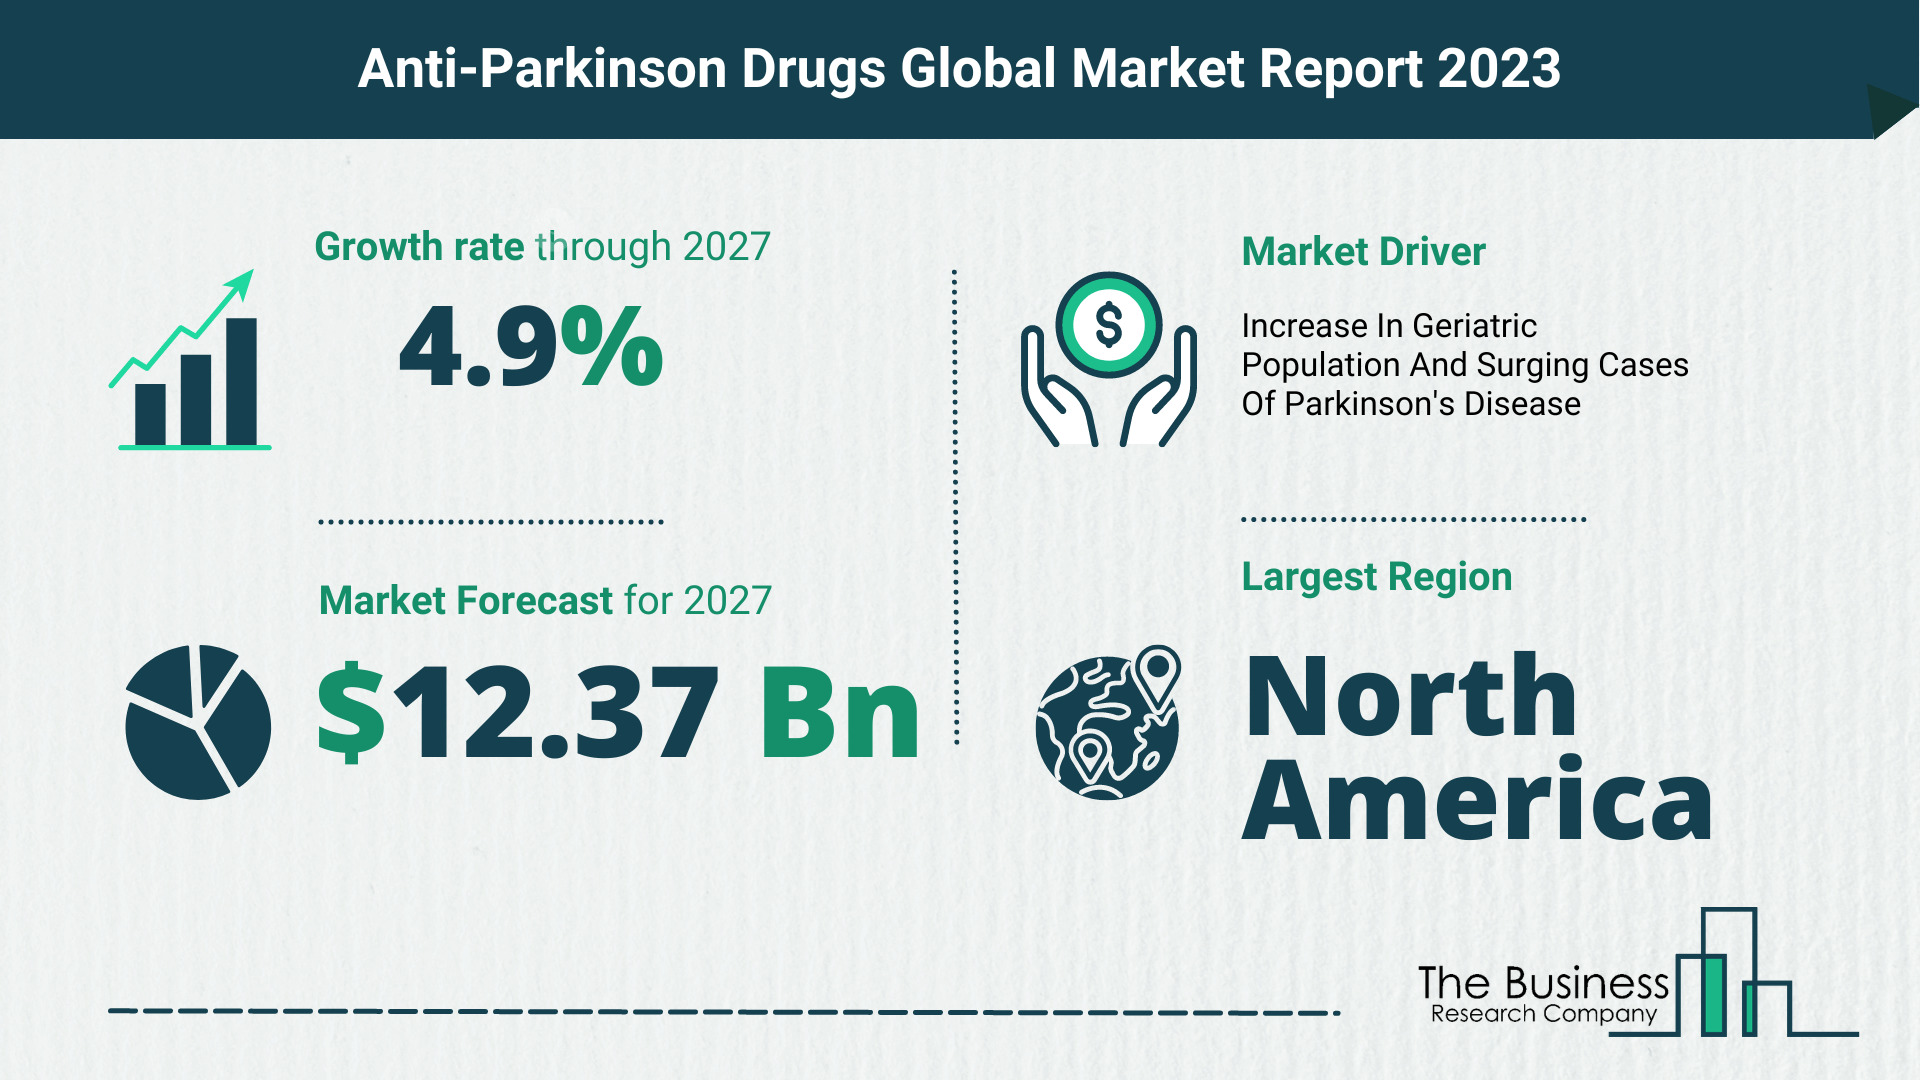 Global Anti-Parkinson Drugs Market Opportunities And Strategies 2023